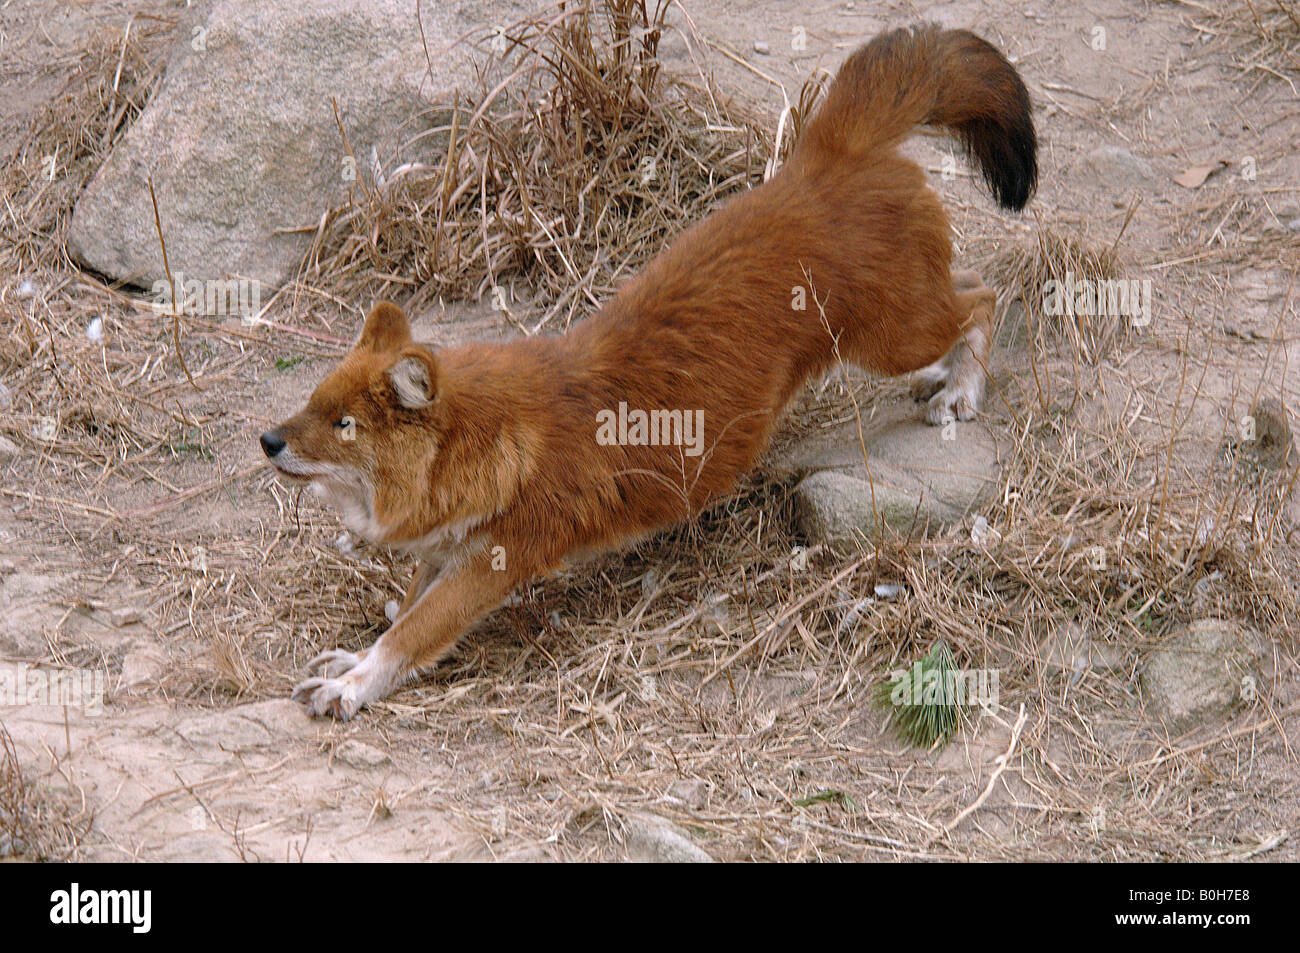 Dhole or Asiatic wild dog Cuon alpinus live and hunt in packs and will attack young gaint pandas China Stock Photo